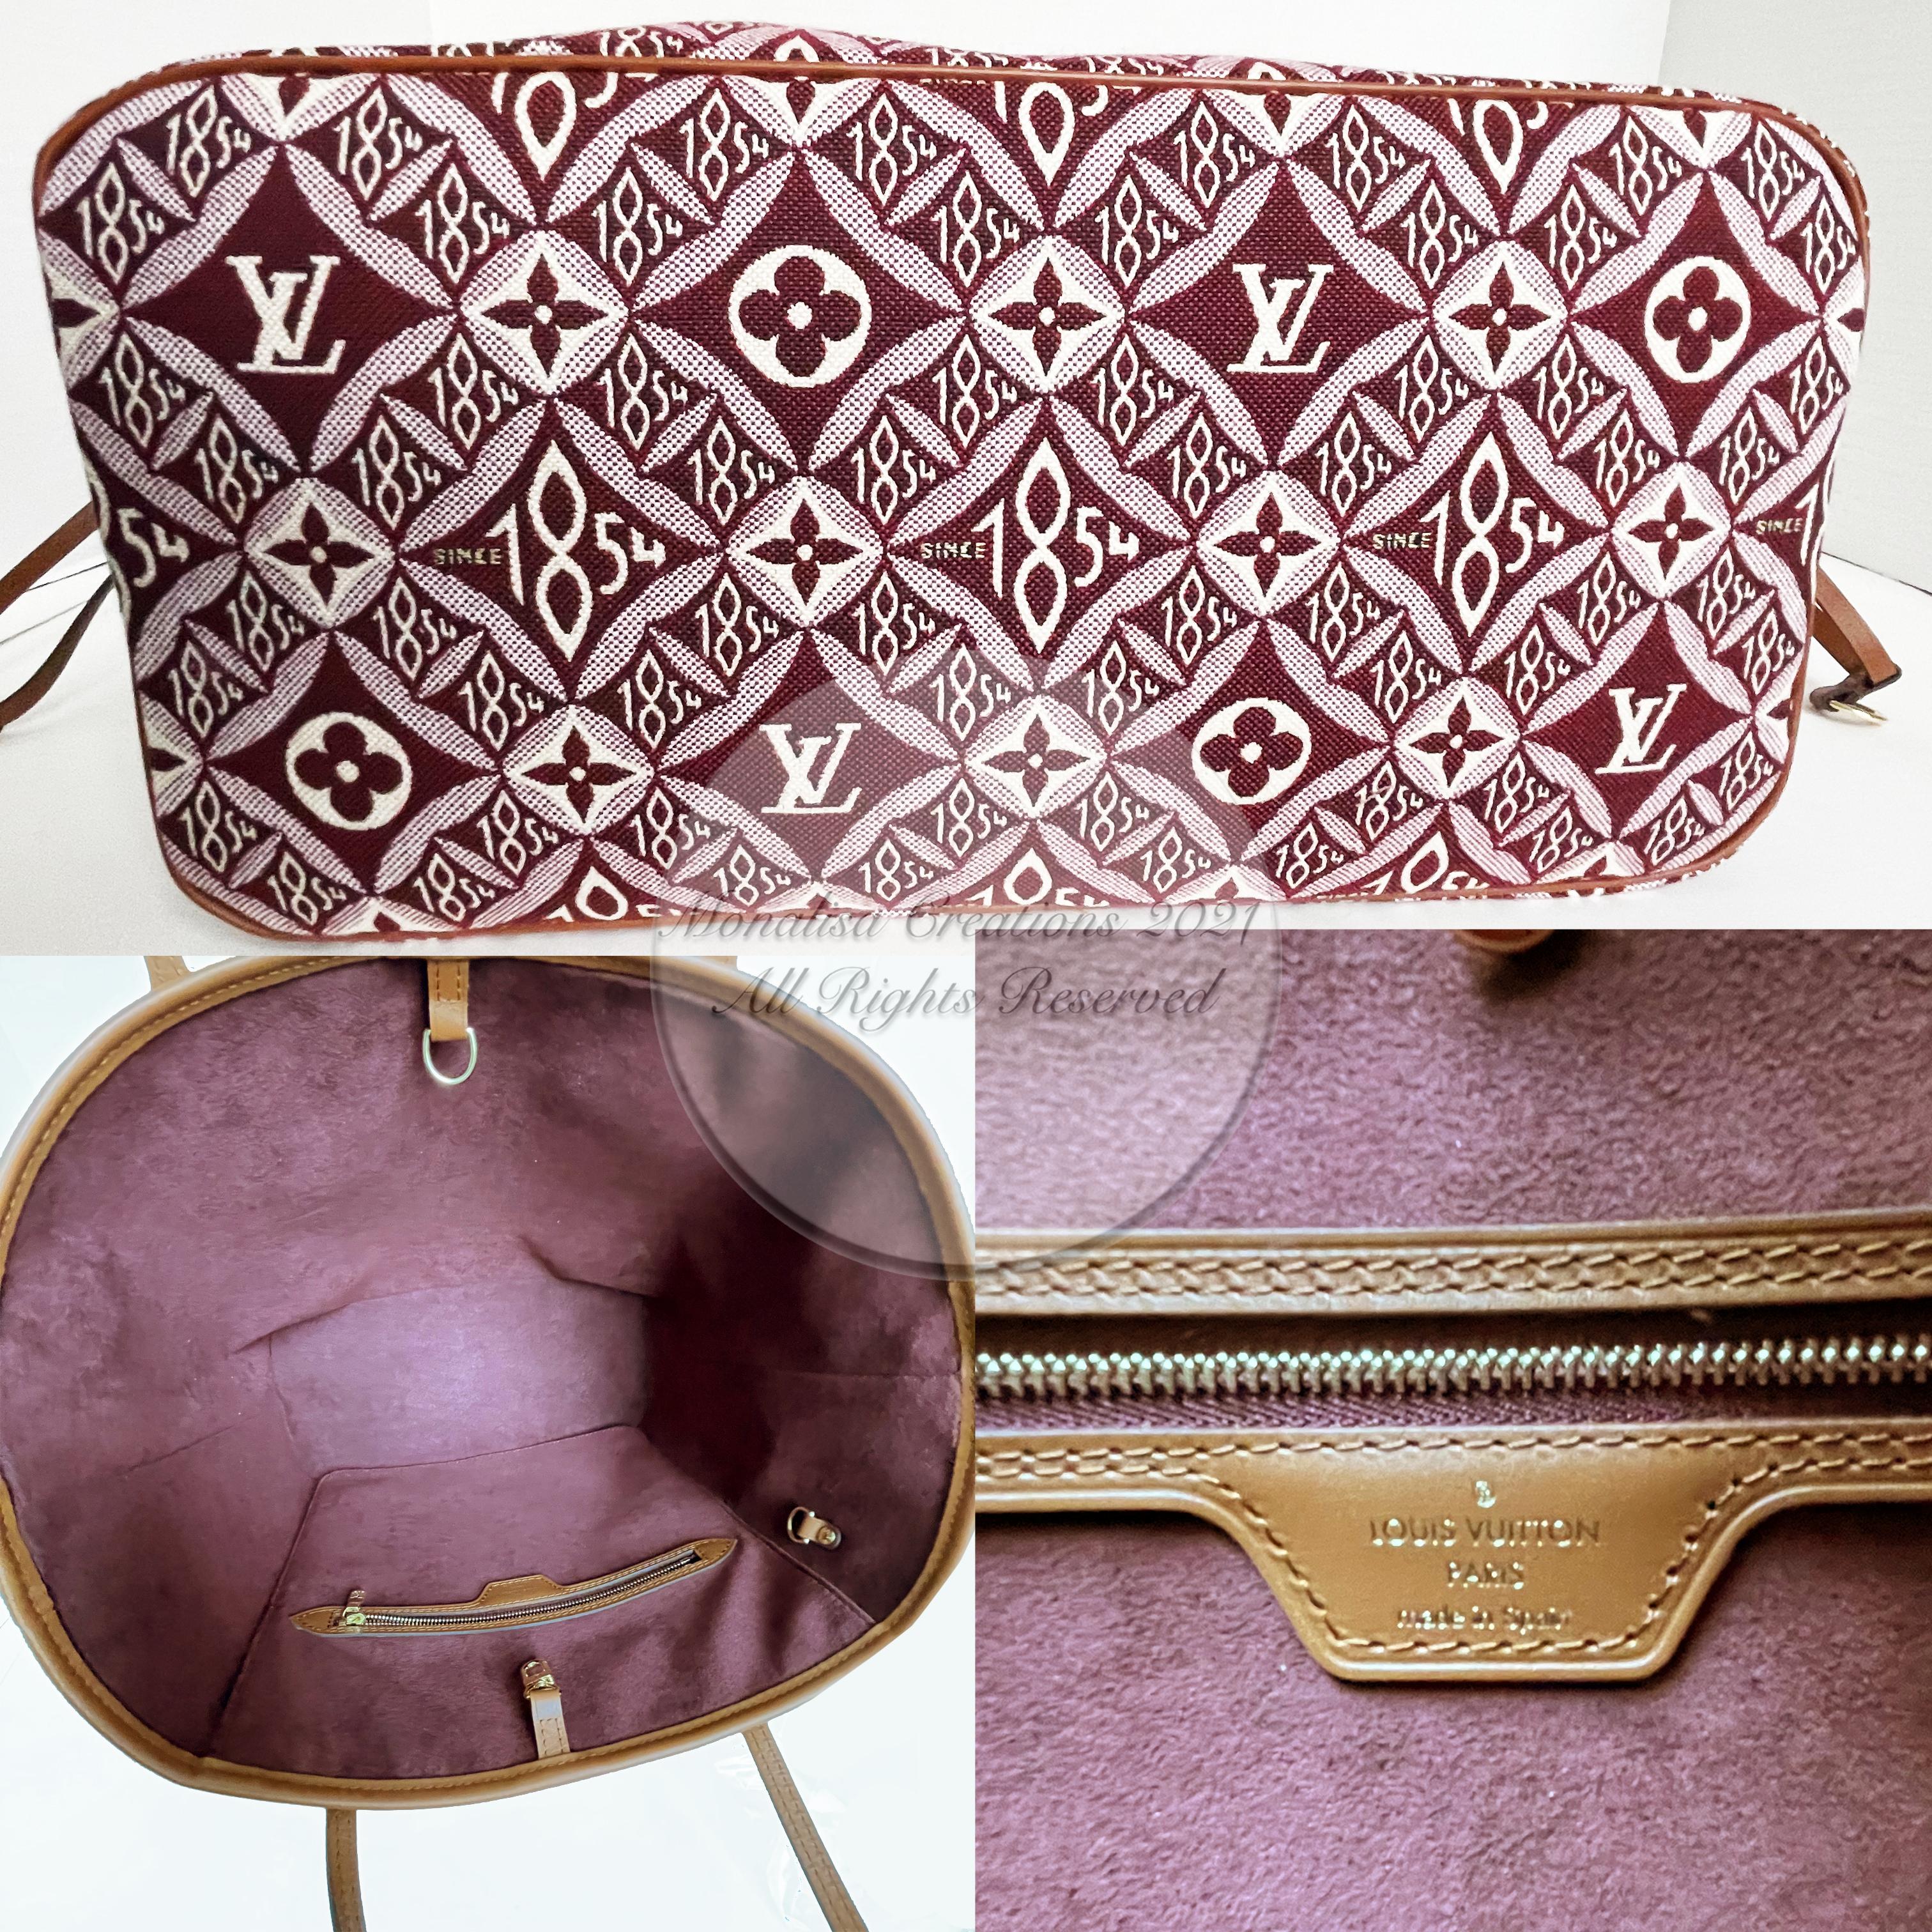 Louis Vuitton Since 1854 Neverfull Tote Bag Bordeaux + Removable Pouch in Box  4